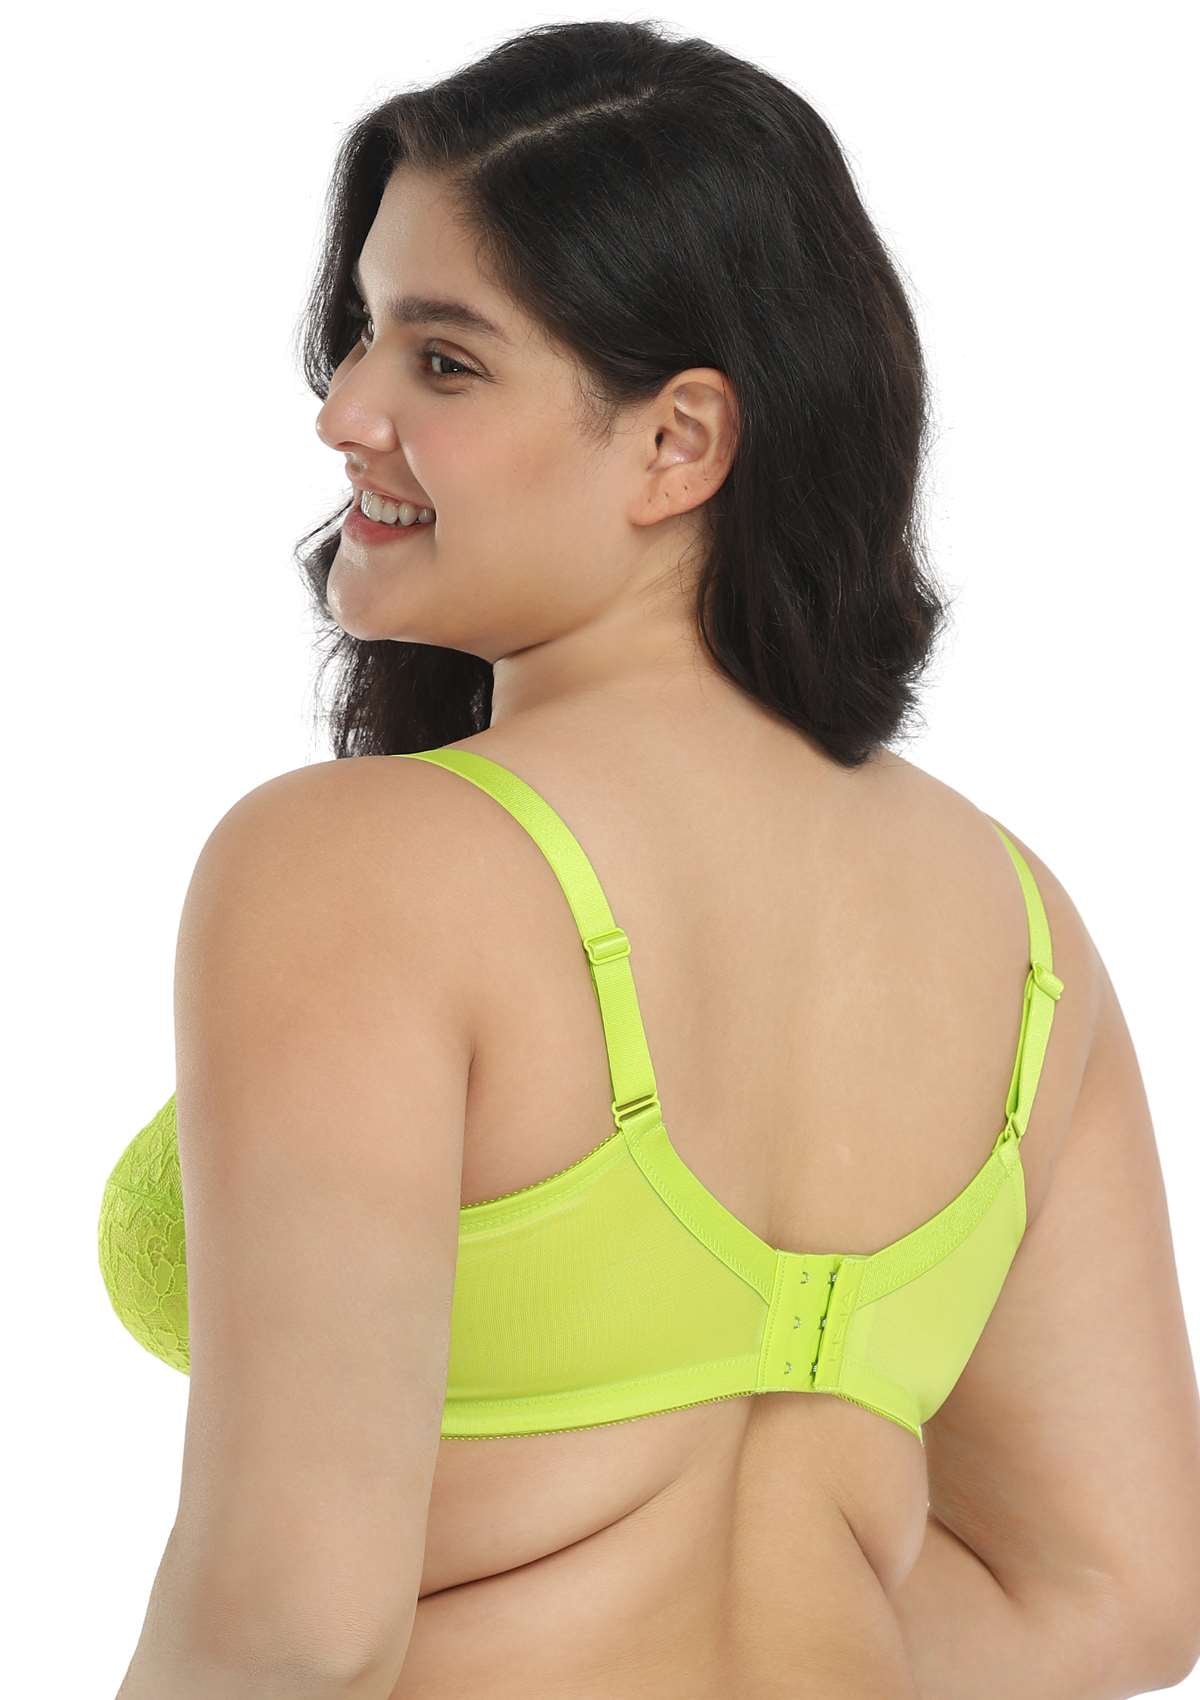 HSIA Enchante Full Cup Minimizing Bra: Supportive Unlined Lace Bra - Lime Green / 40 / H